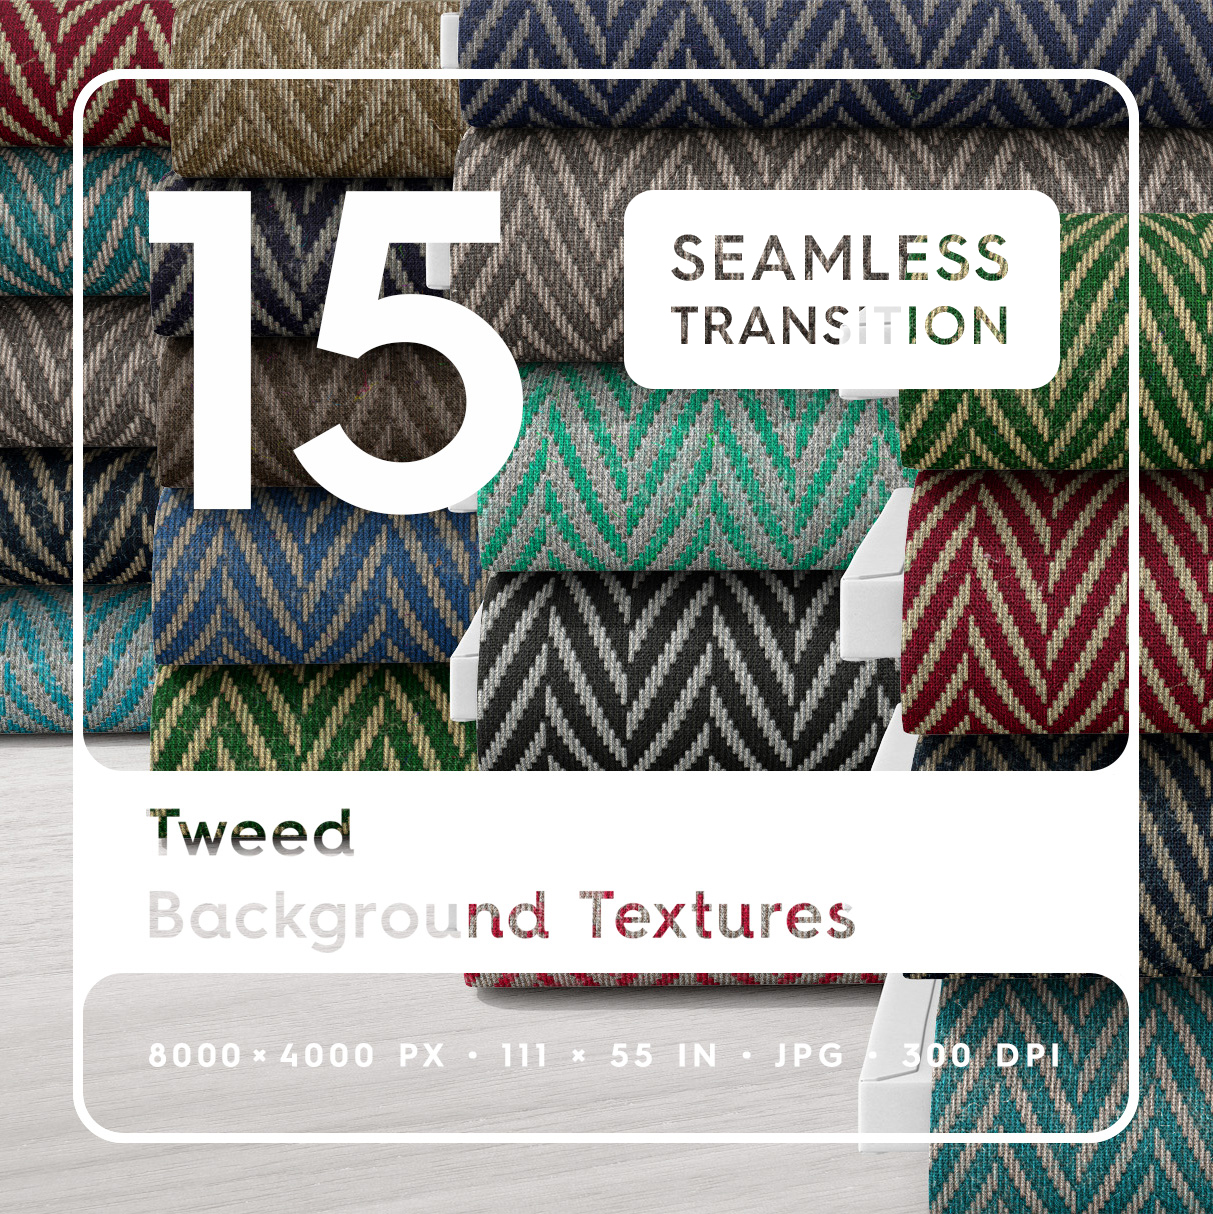 15 Tweed Background Textures Square Cover